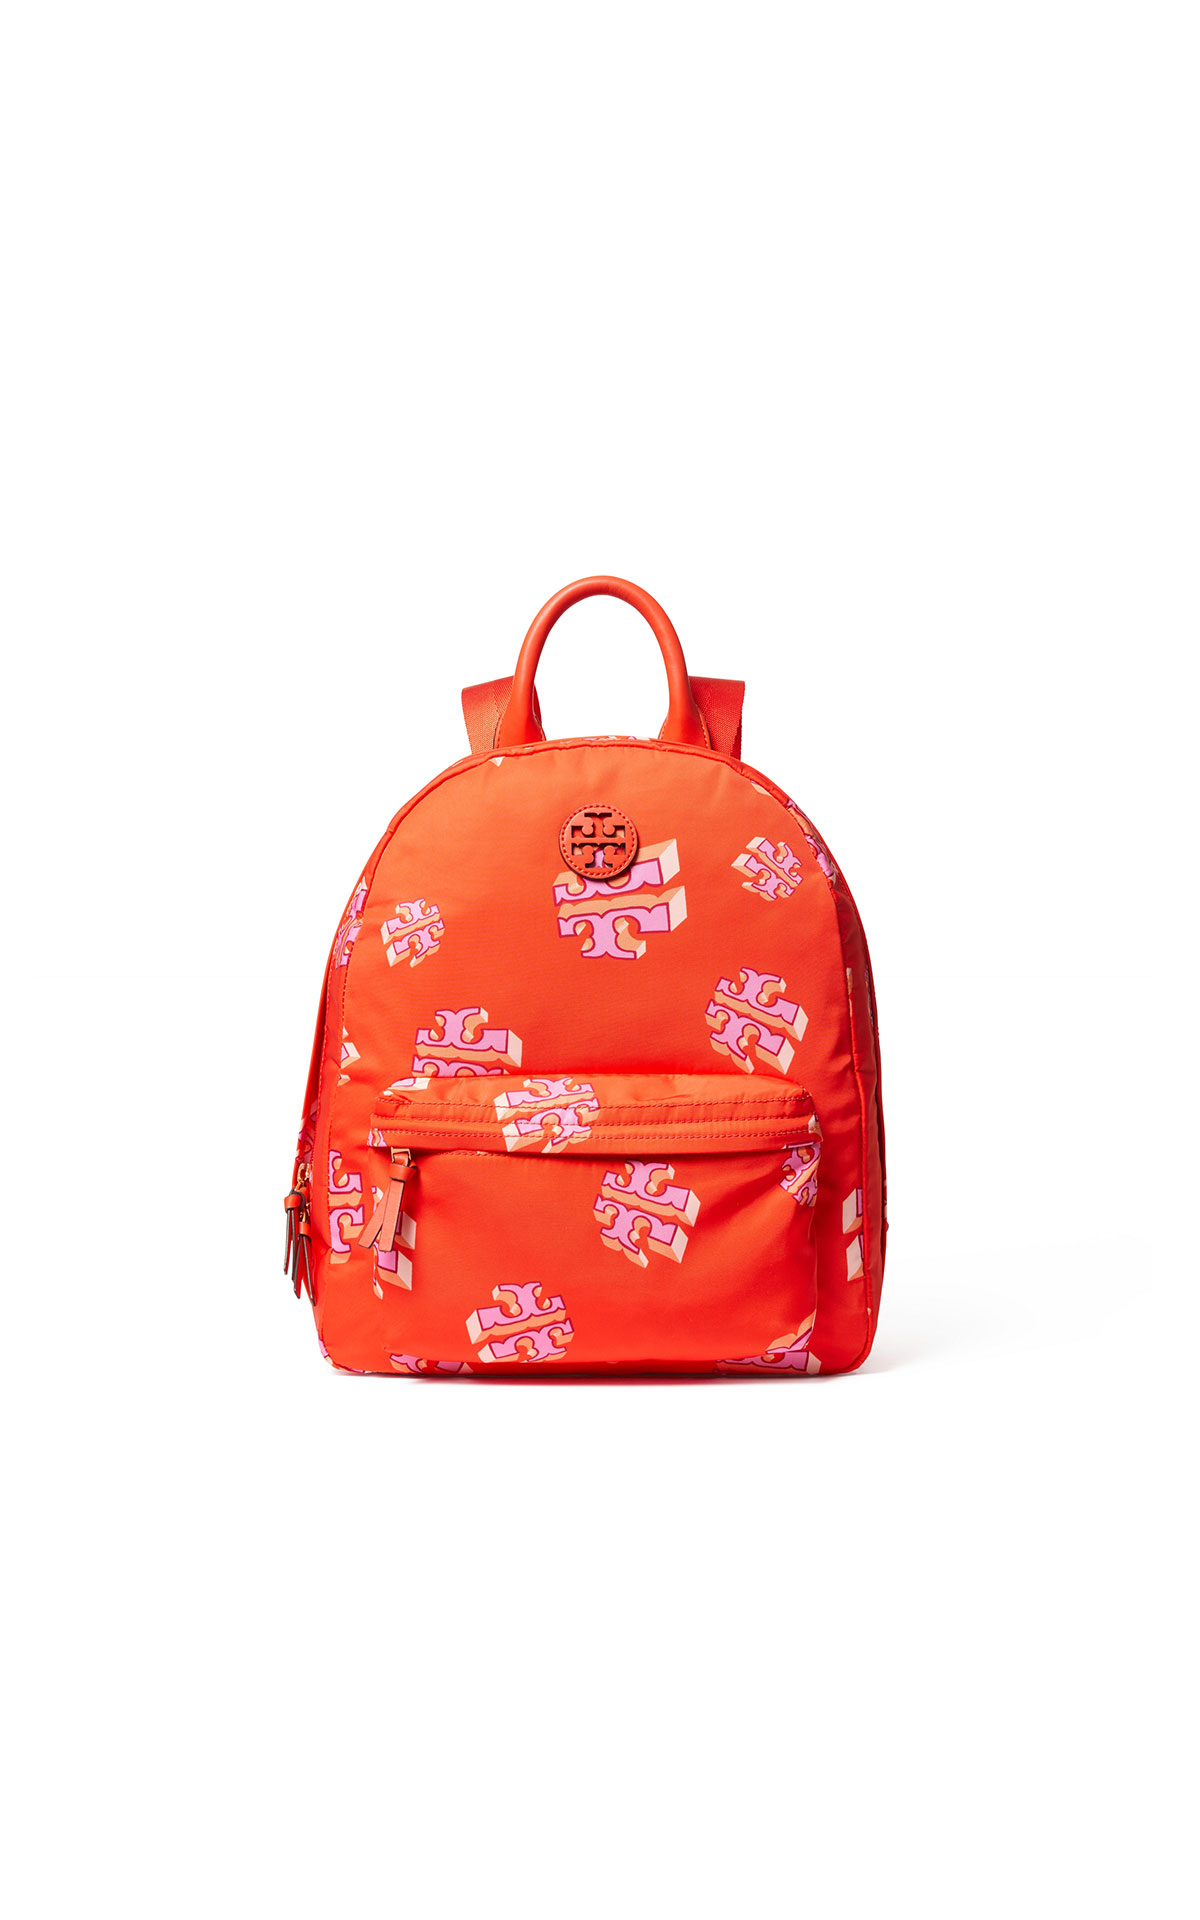 Tory Burch ella nylon backpack at The Bicester Village Shopping Collection